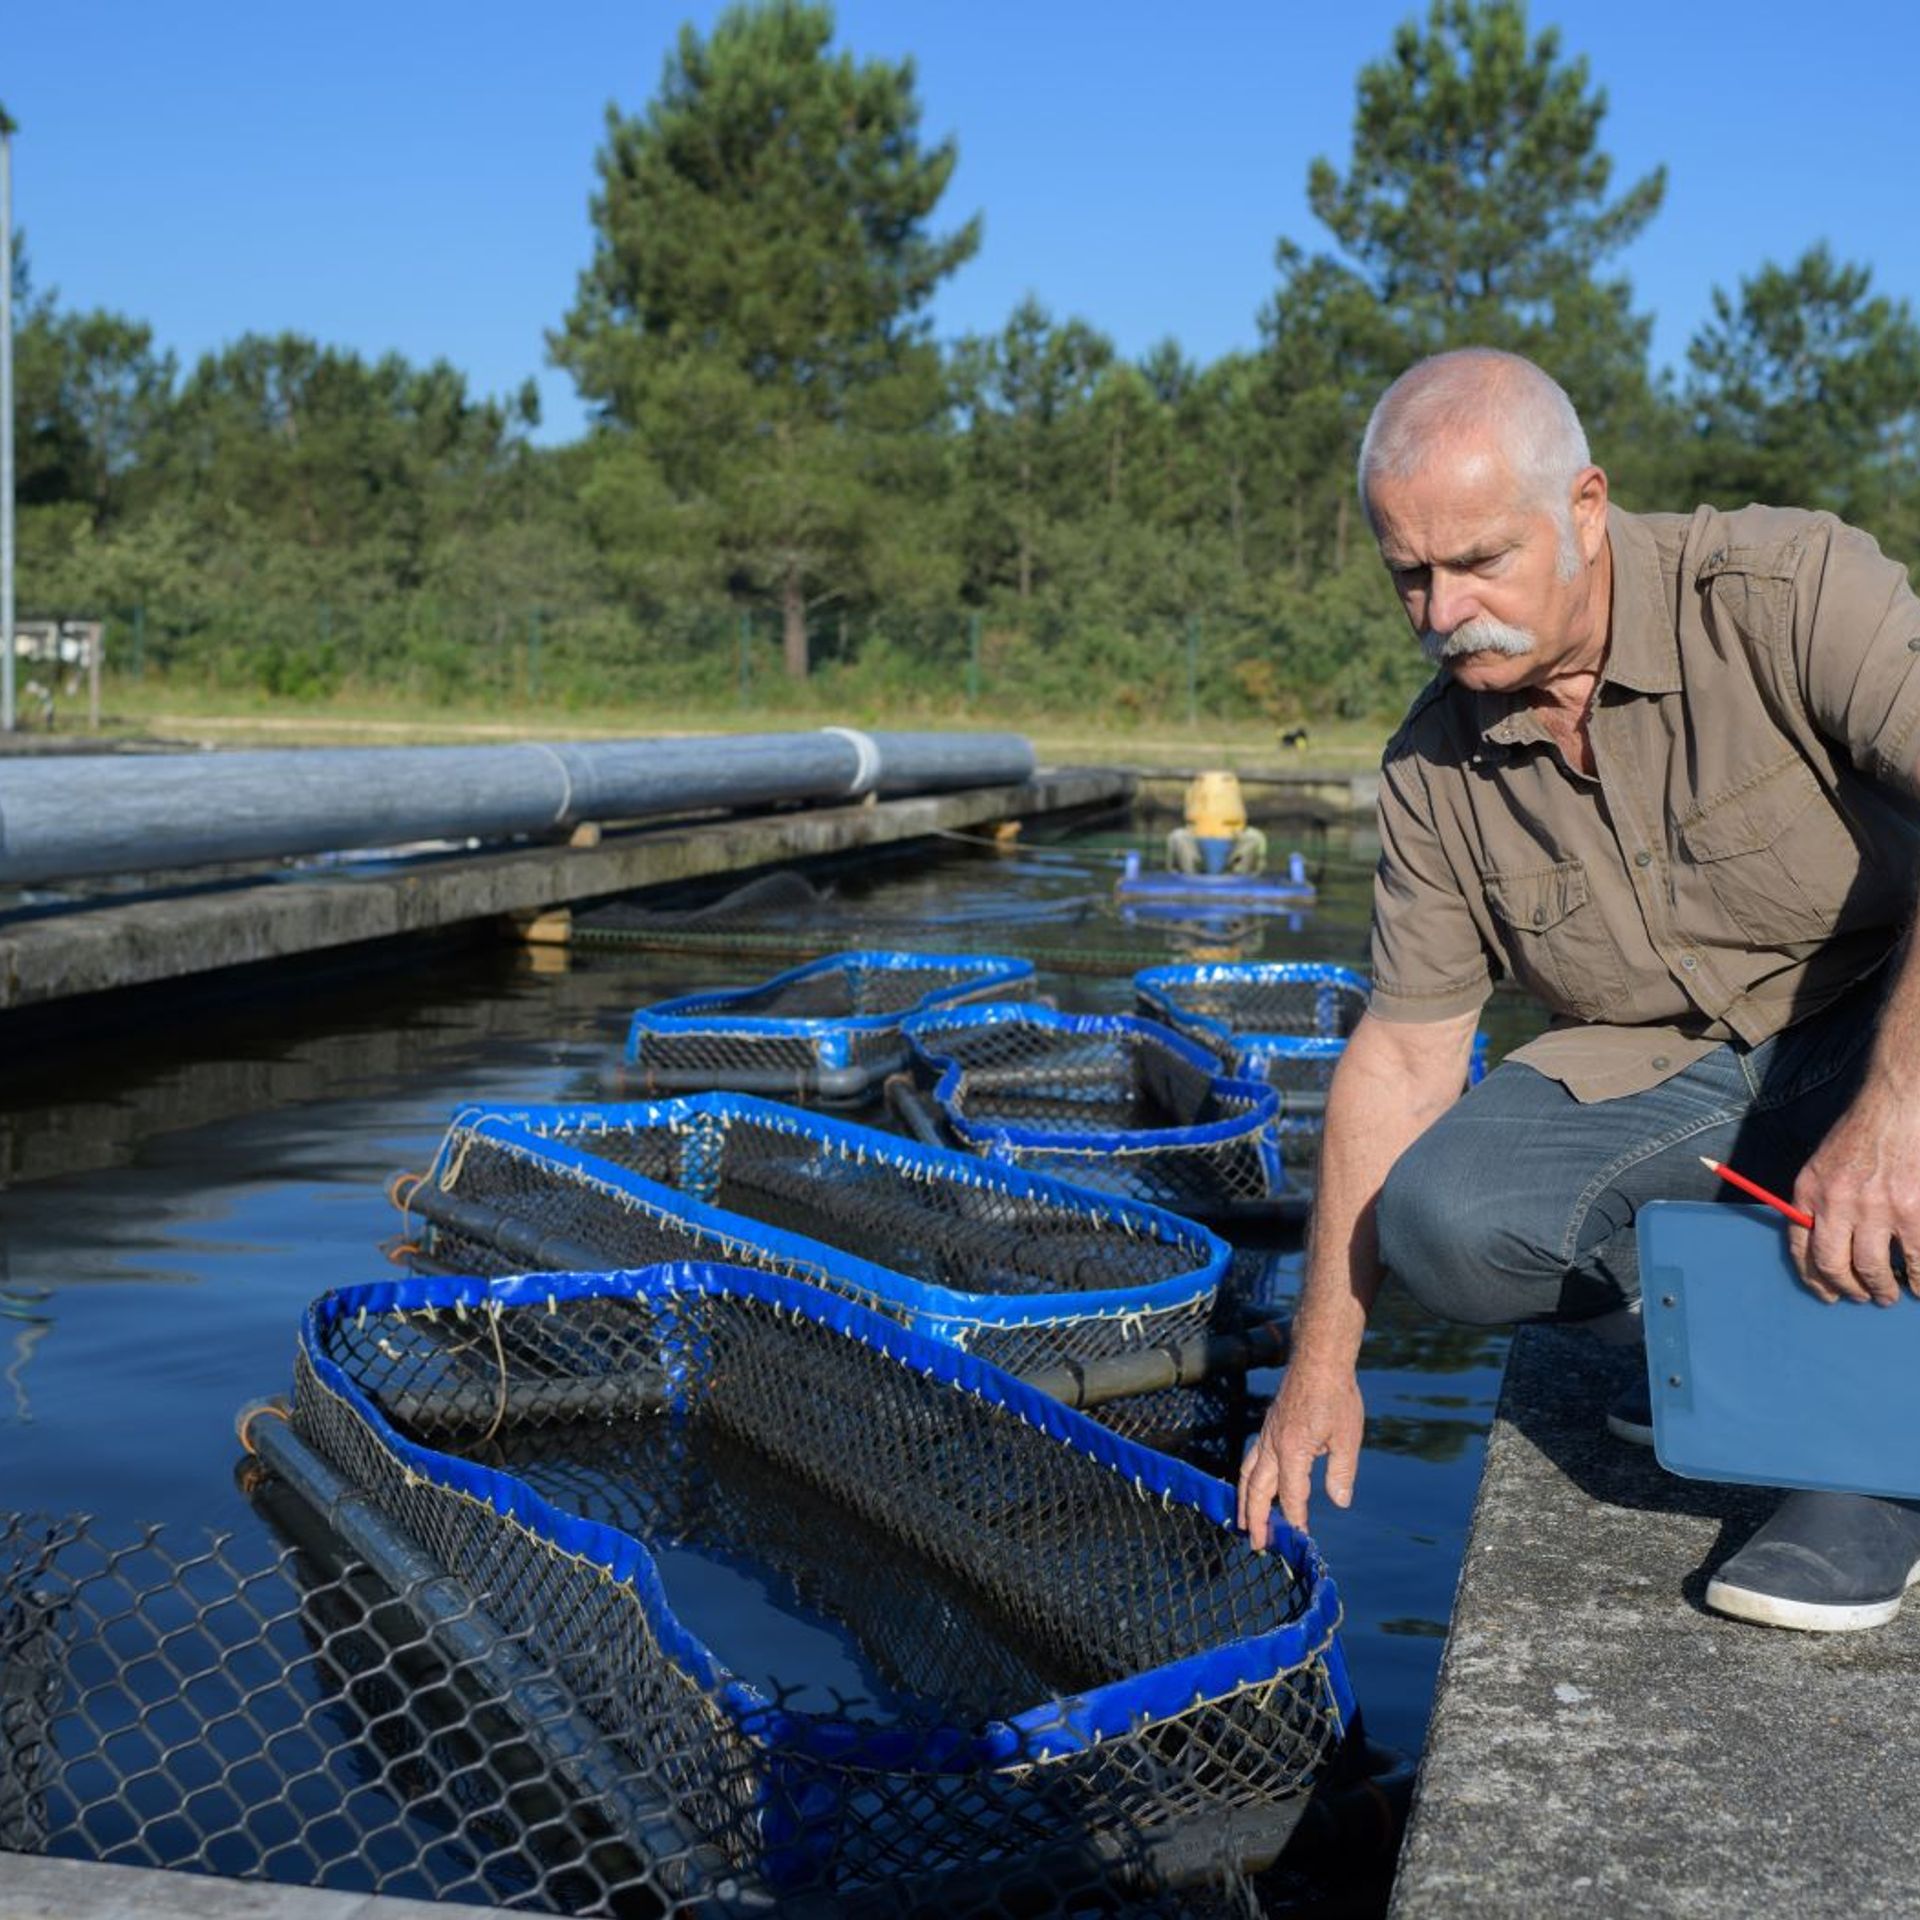 Image of an aquaculture producer monitoring fish on the farm